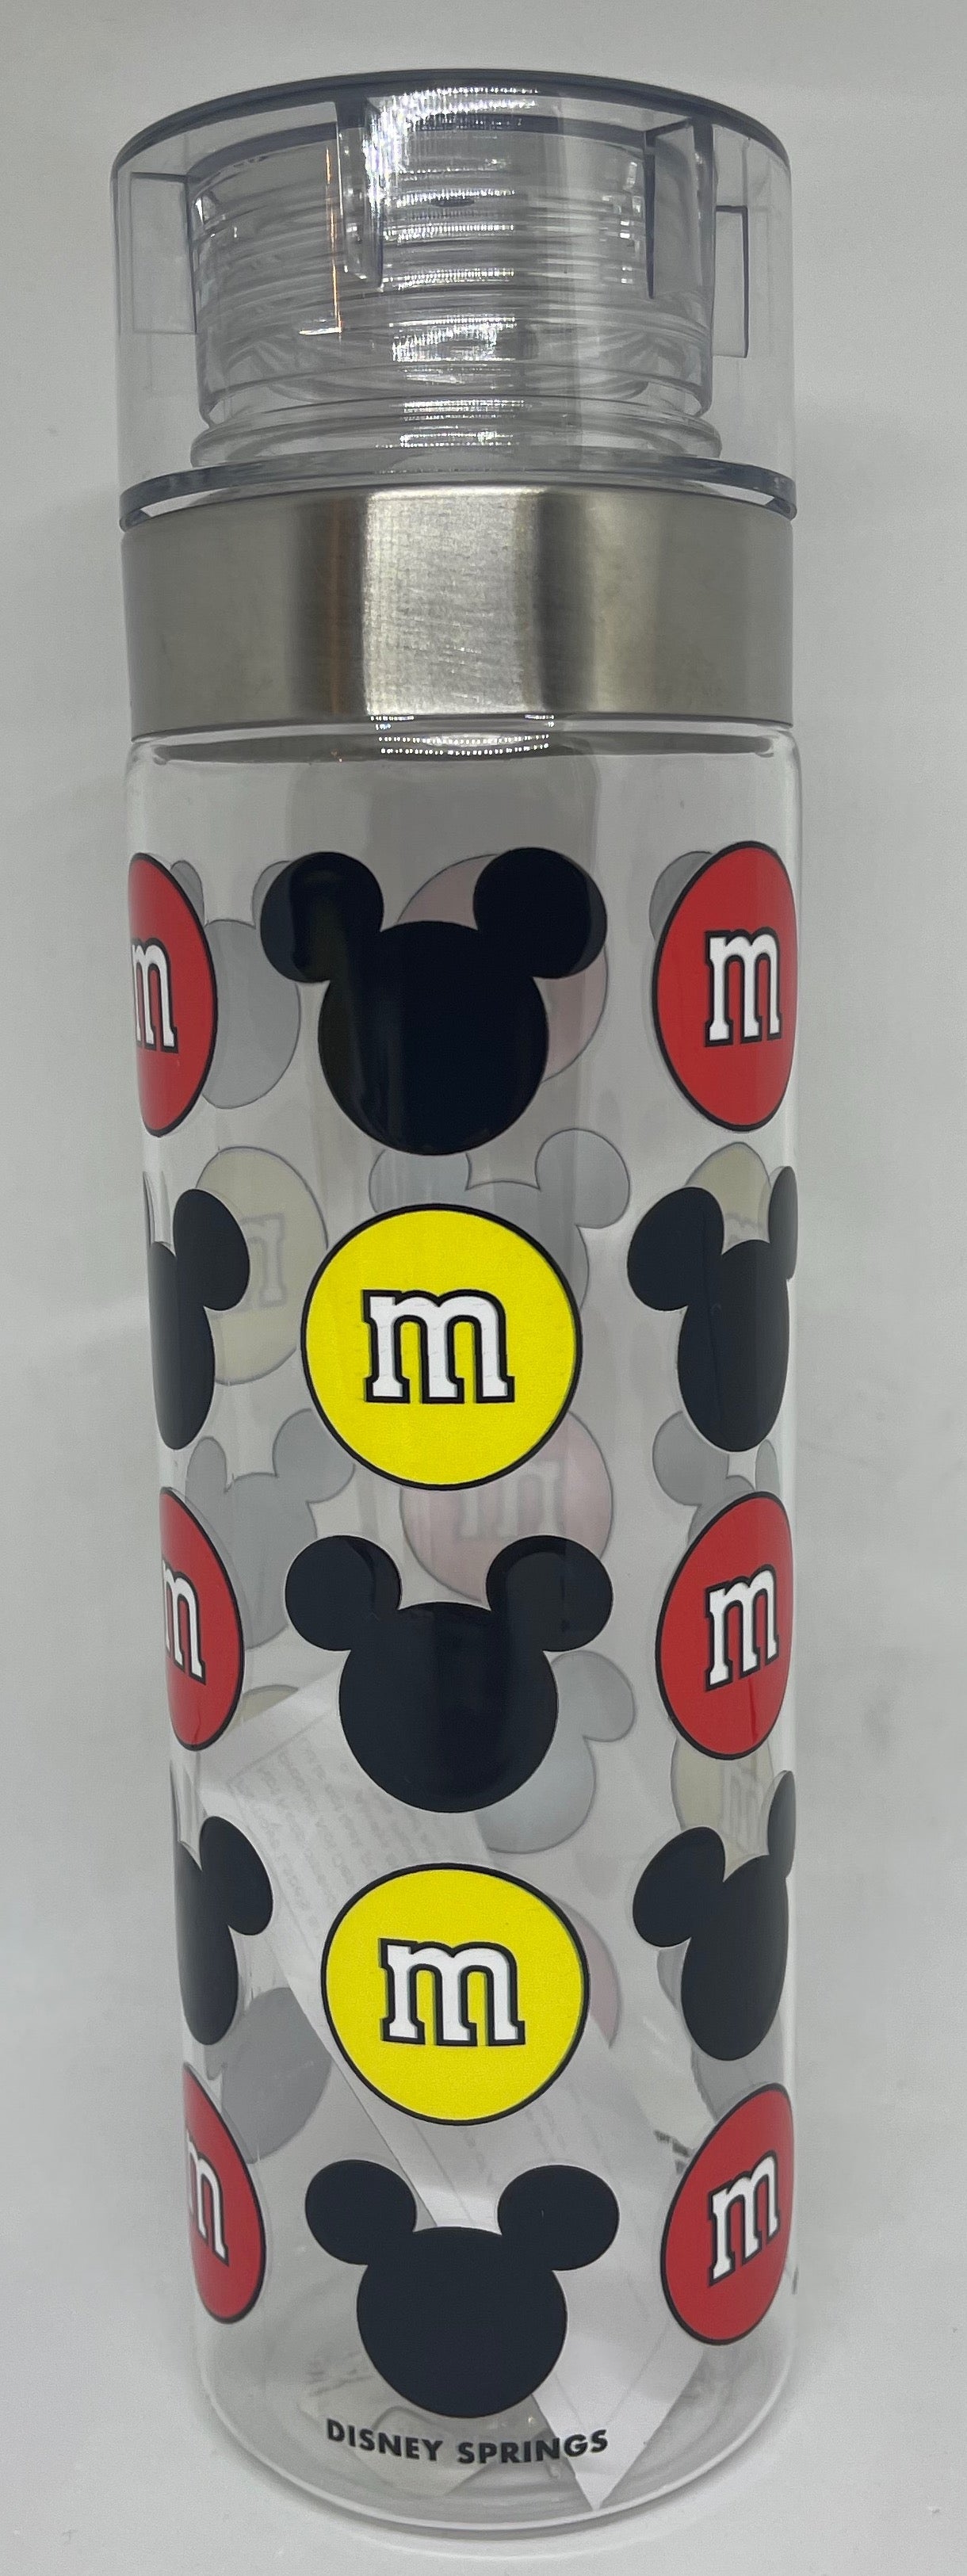 Disney Springs M&M's World Red and Yellow Mickey Icons Bottle New